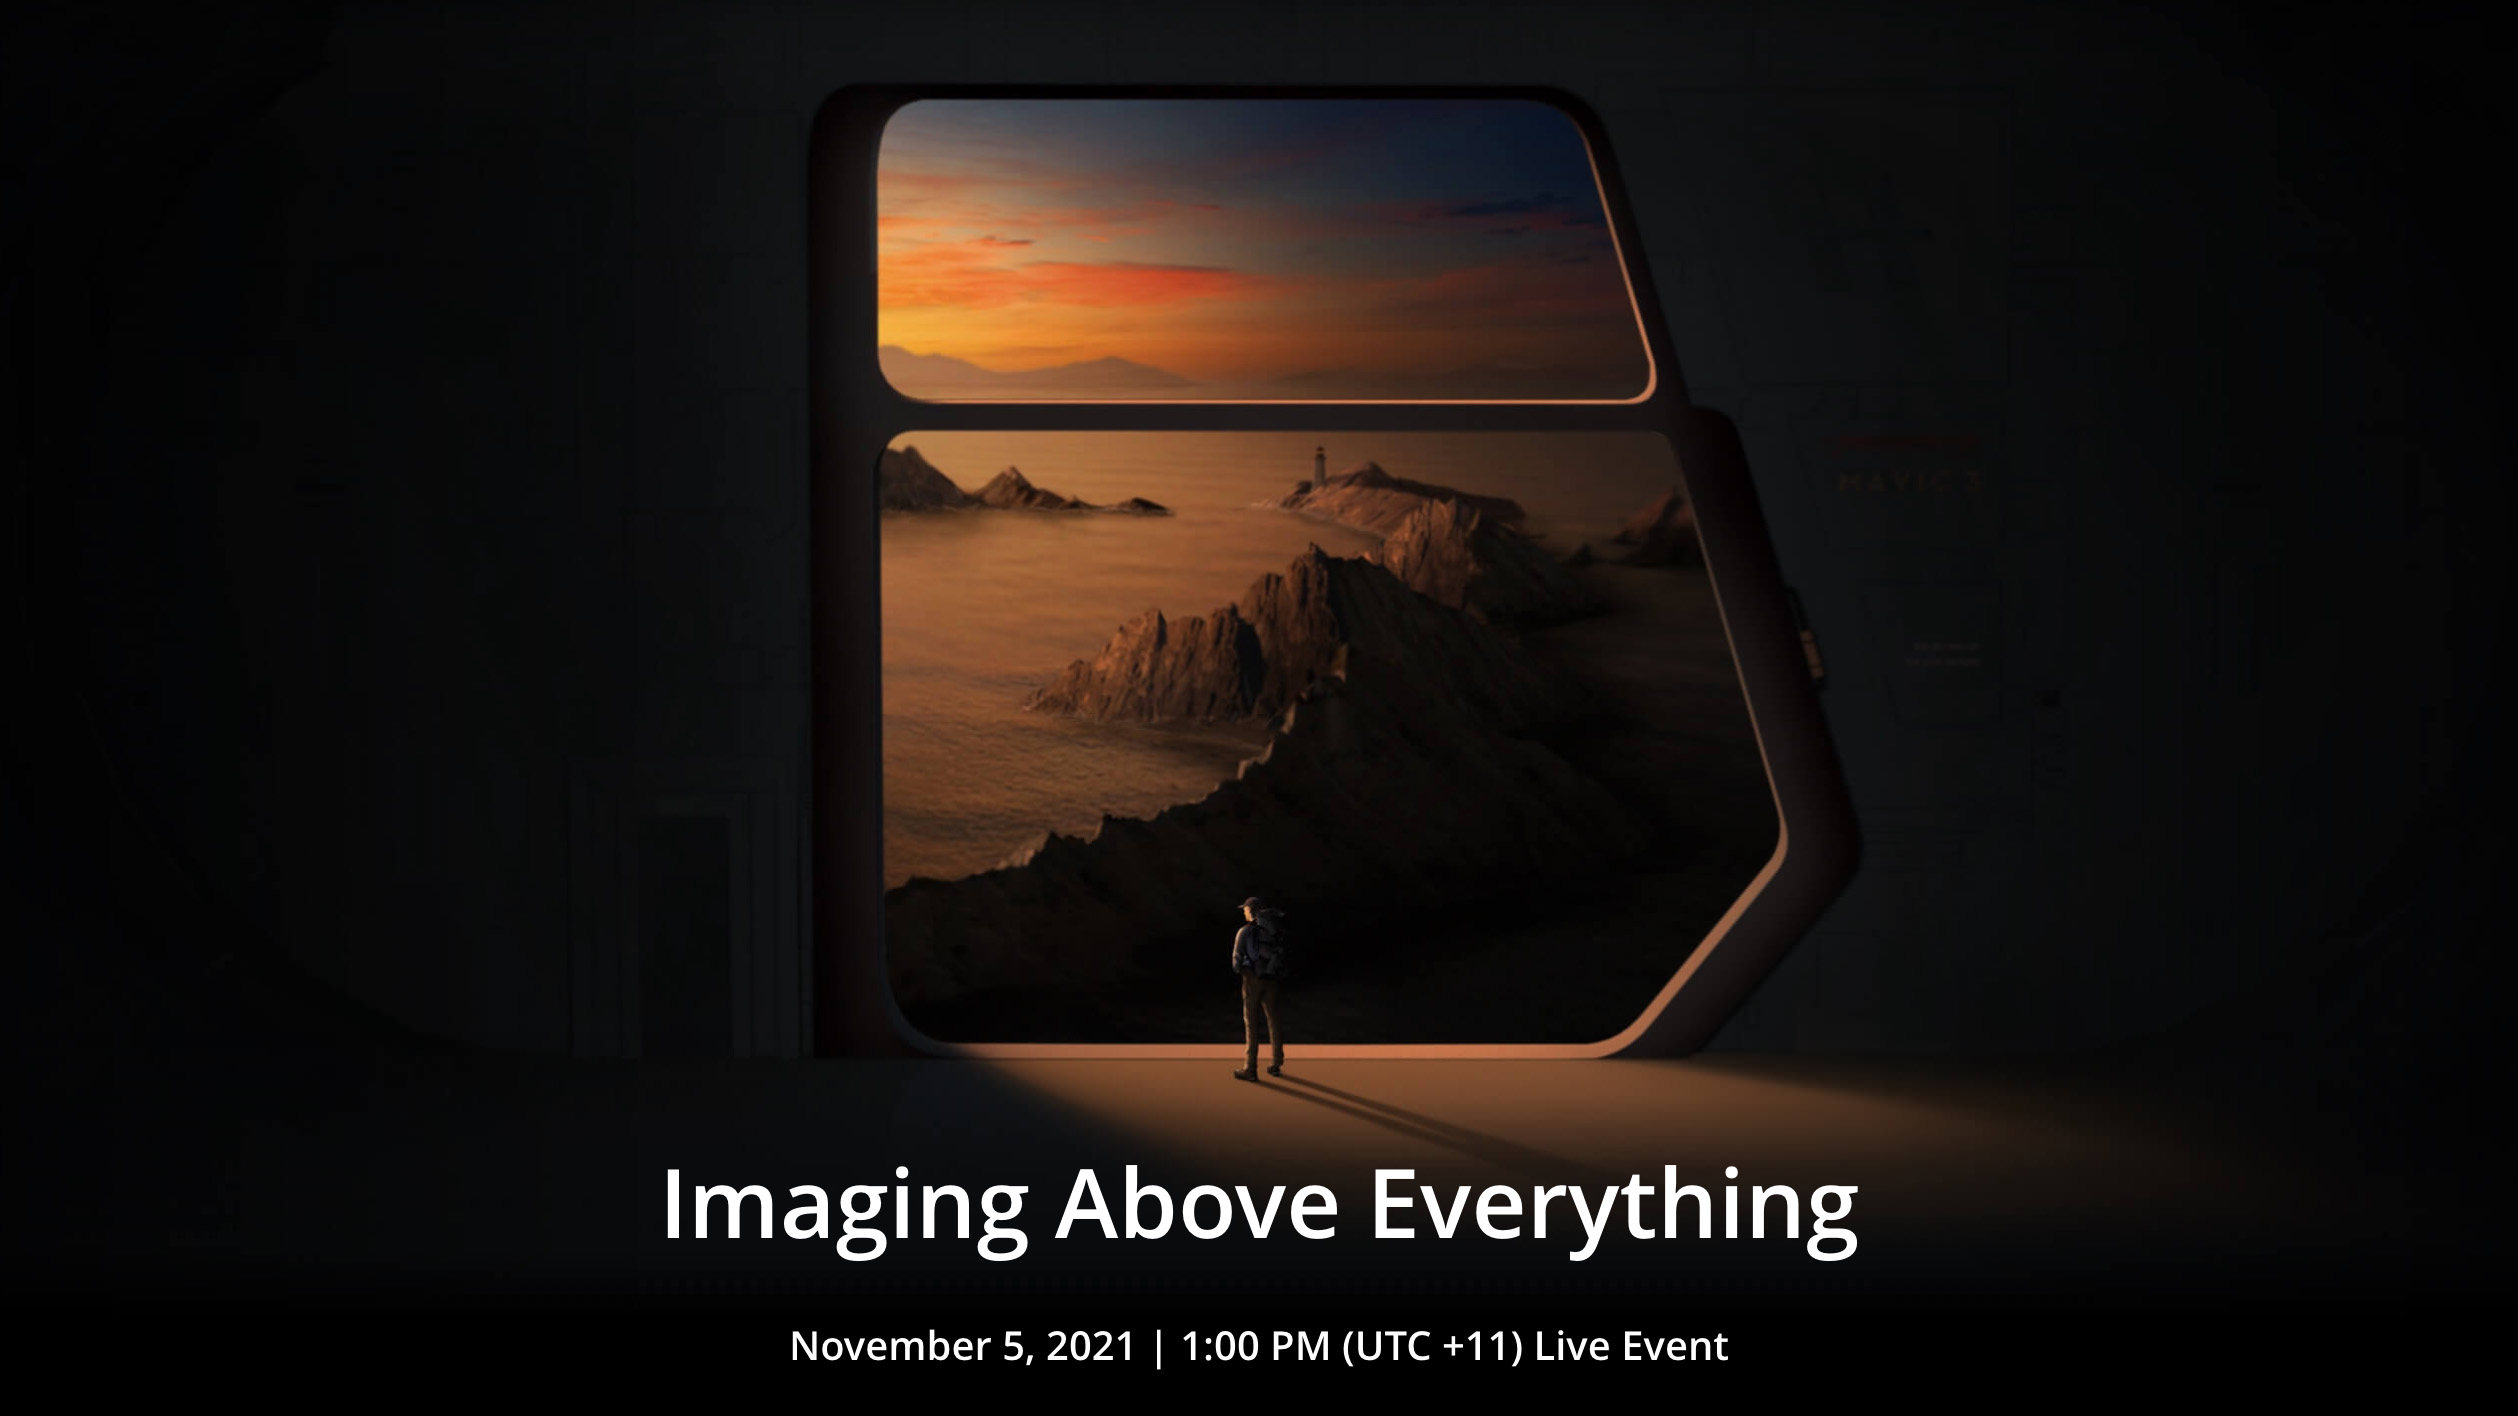 A teaser poster for the DJI Mavic 3 drone showing a man looking out of a large window